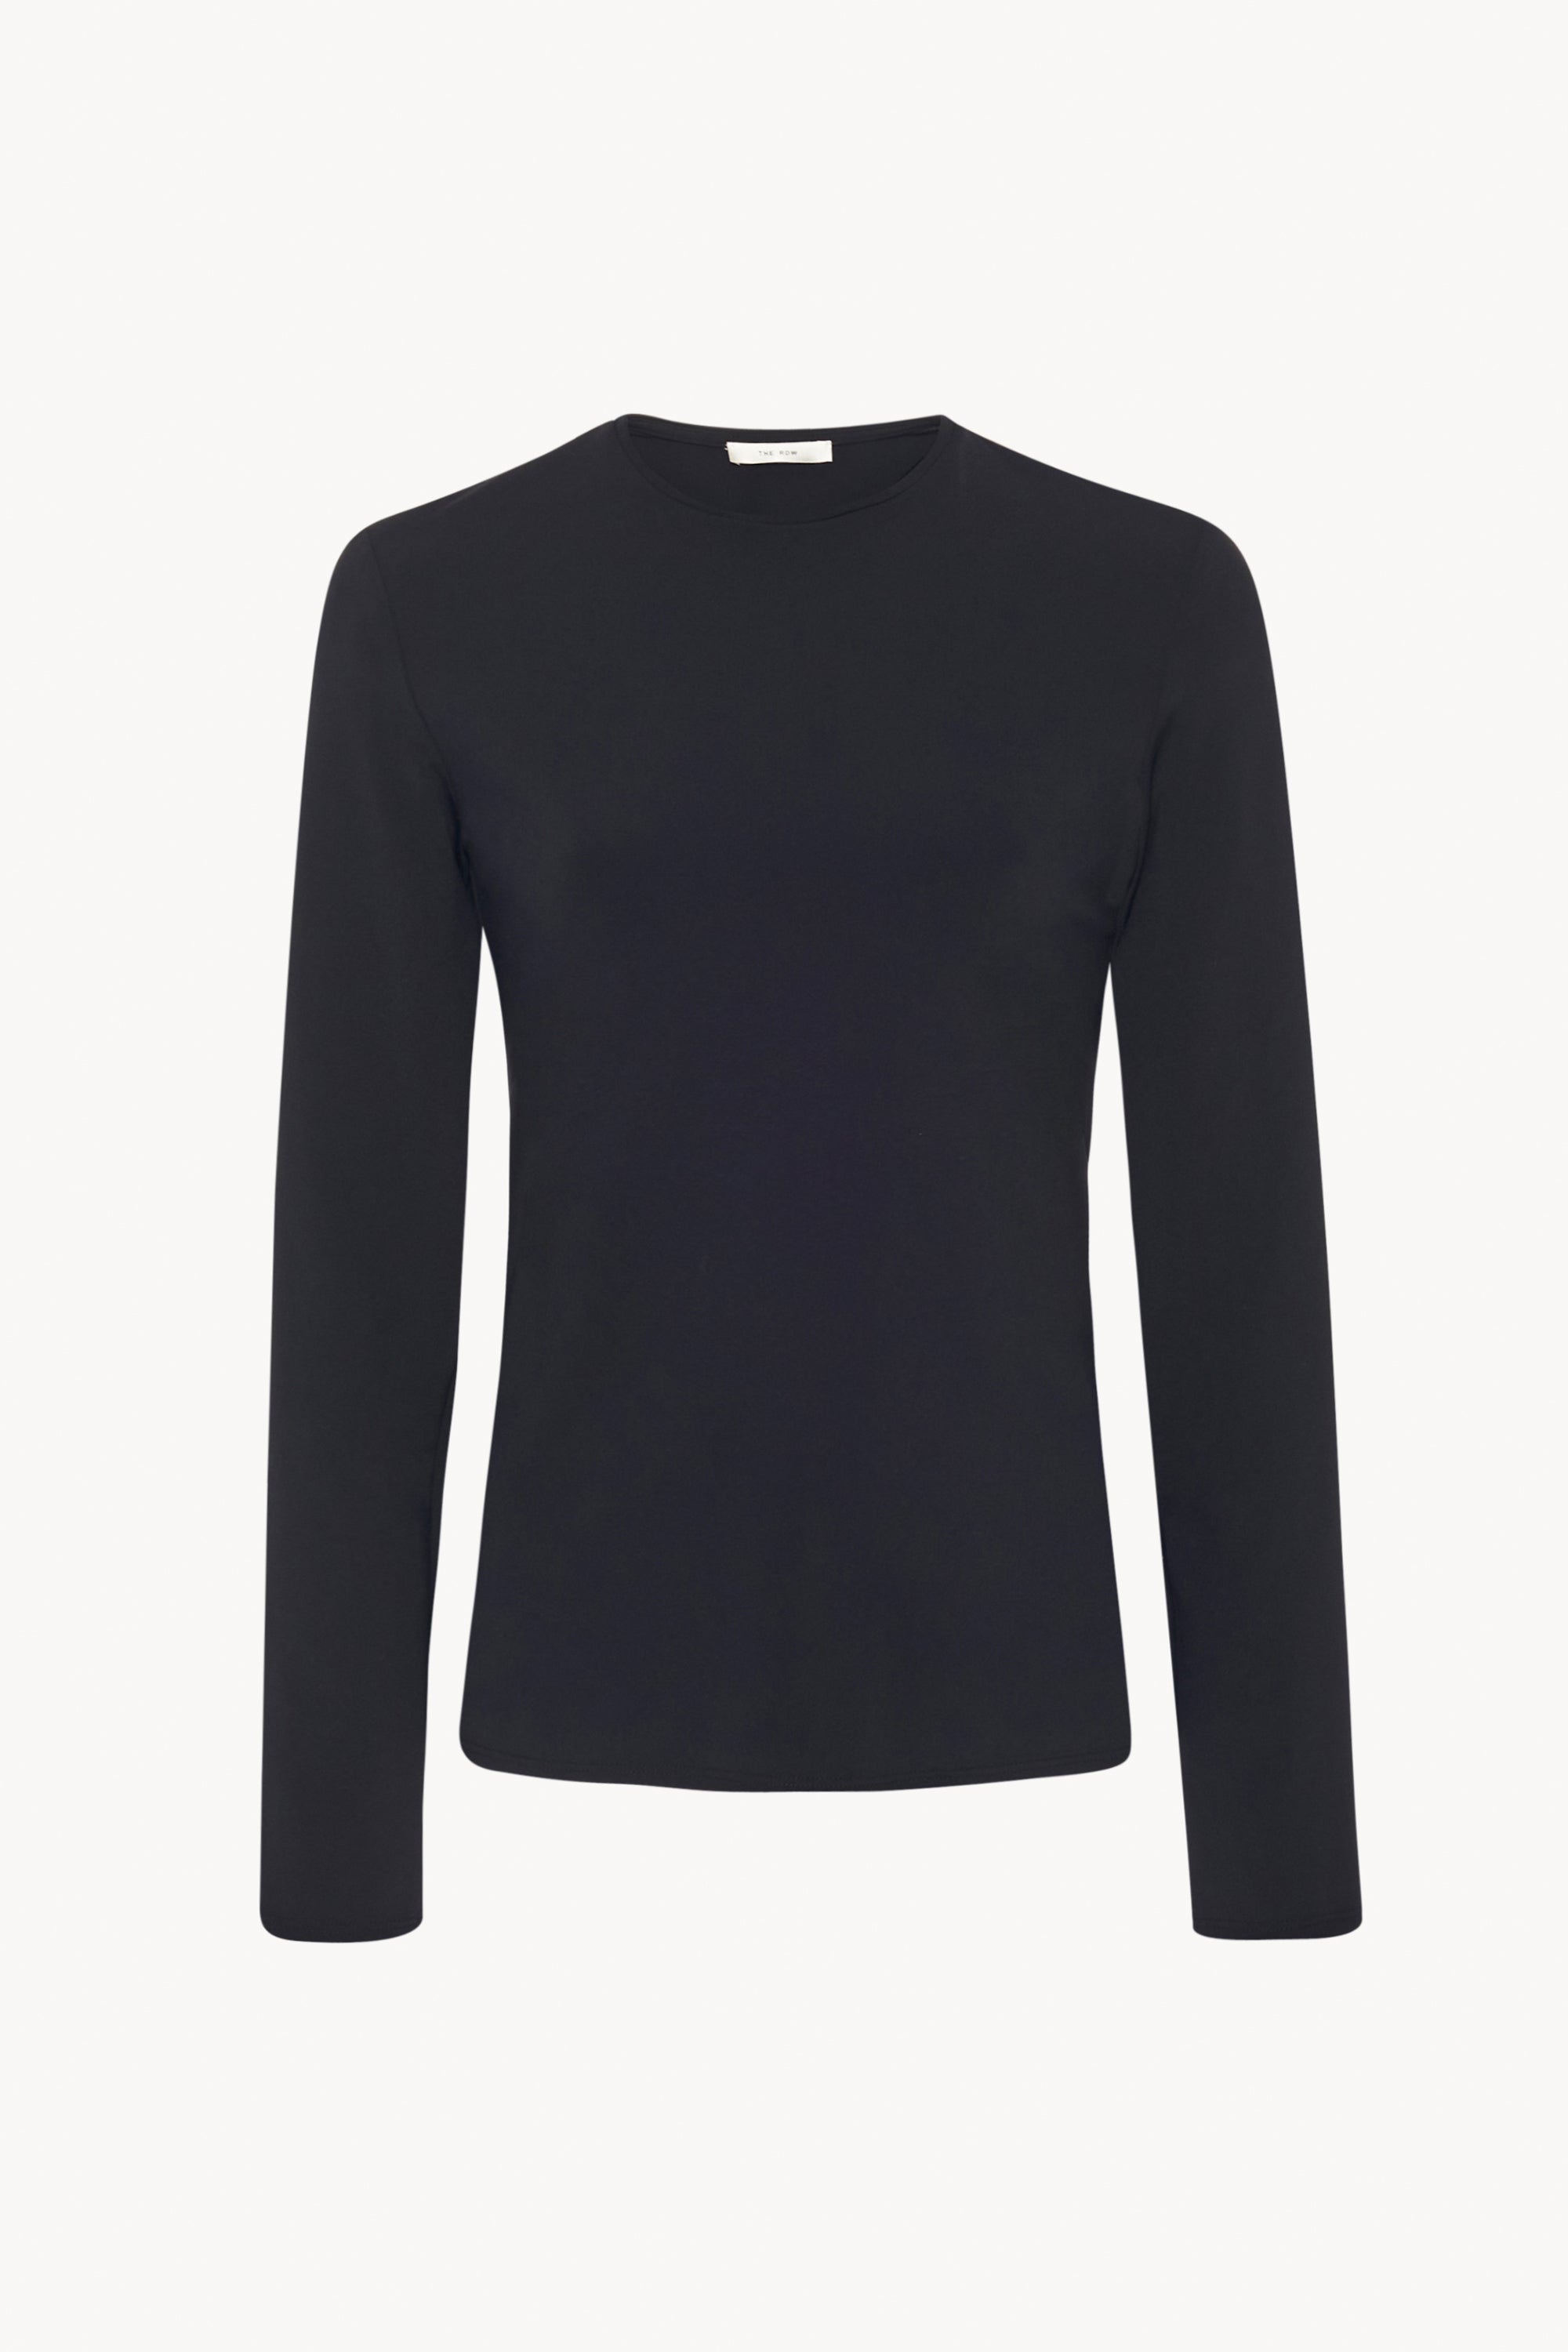 Sherman Top Black in Cotton – The Row